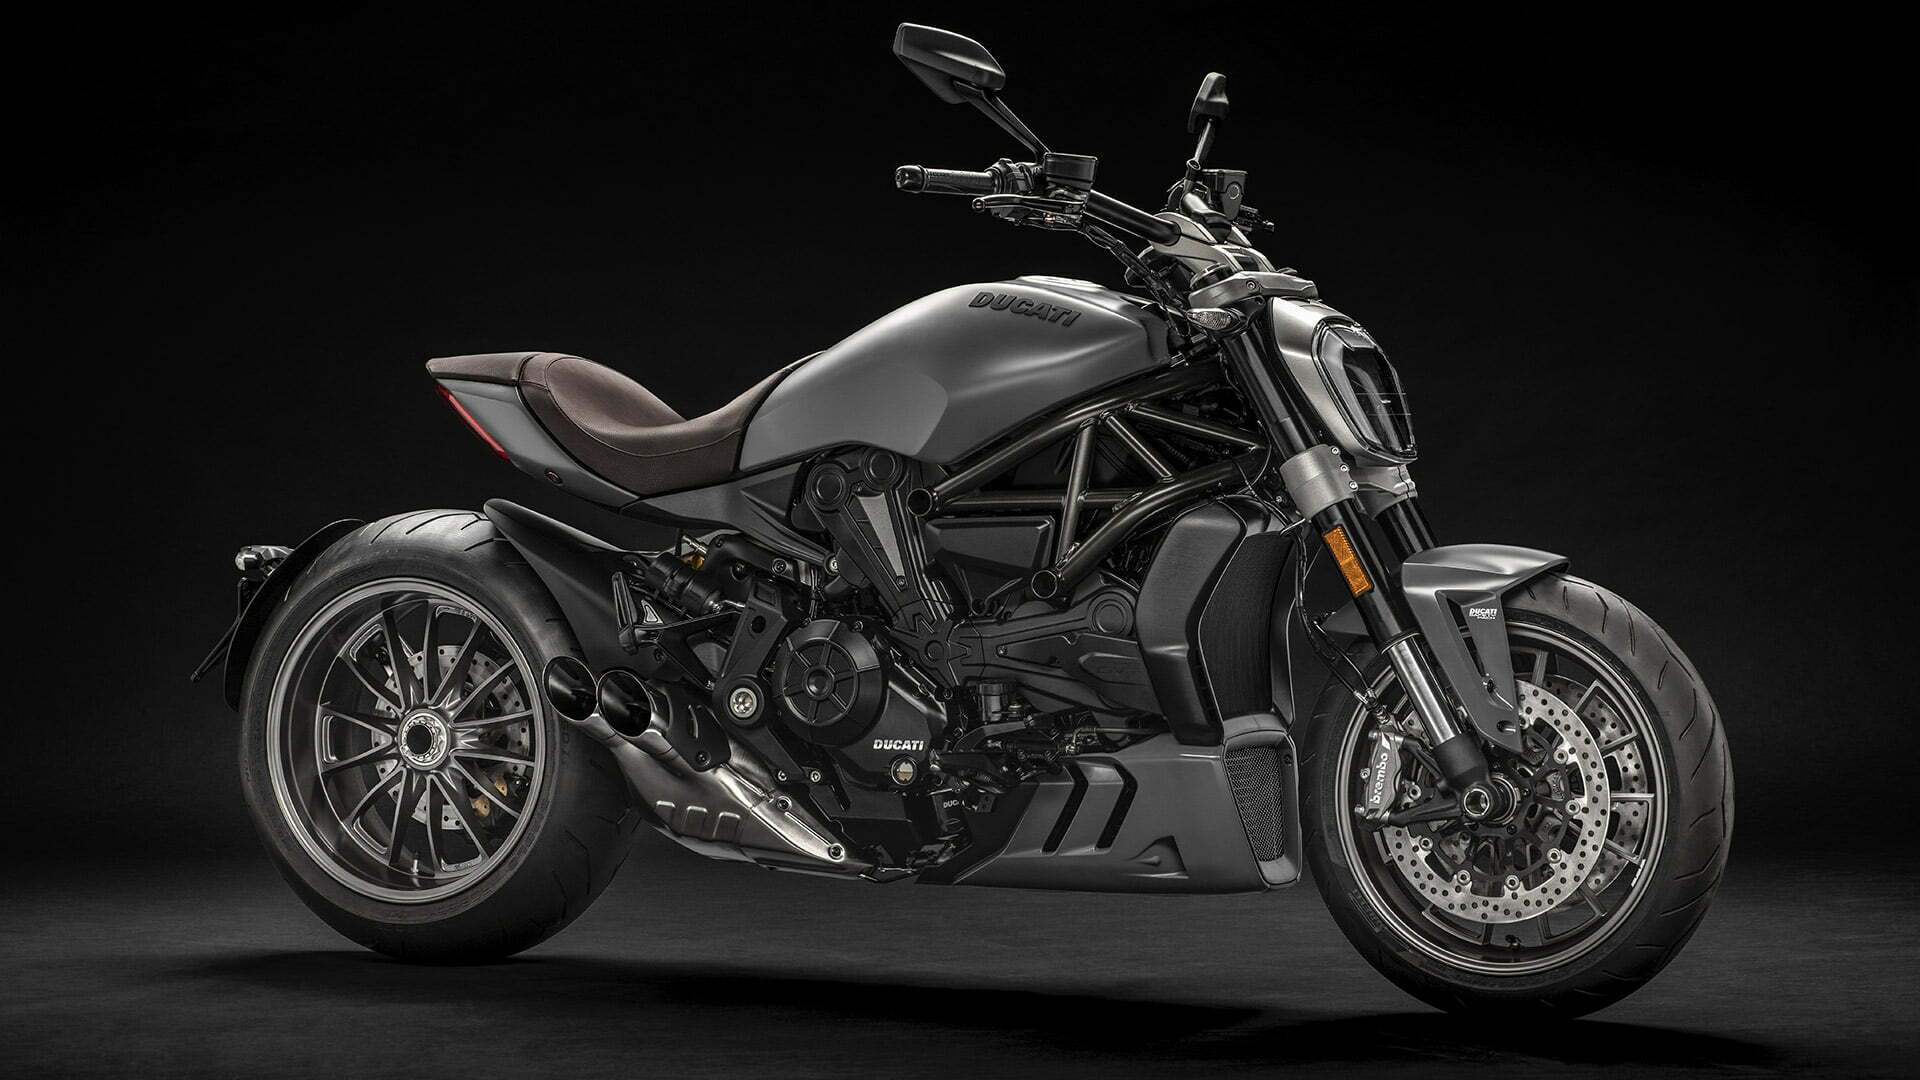 The XDiavel is the “more cruiser-y” version of Ducati’s fire-breathing Diavel. That means a slightly different chassis and more laid-back ergos, but same 153 hp. Shown is 2020 model.